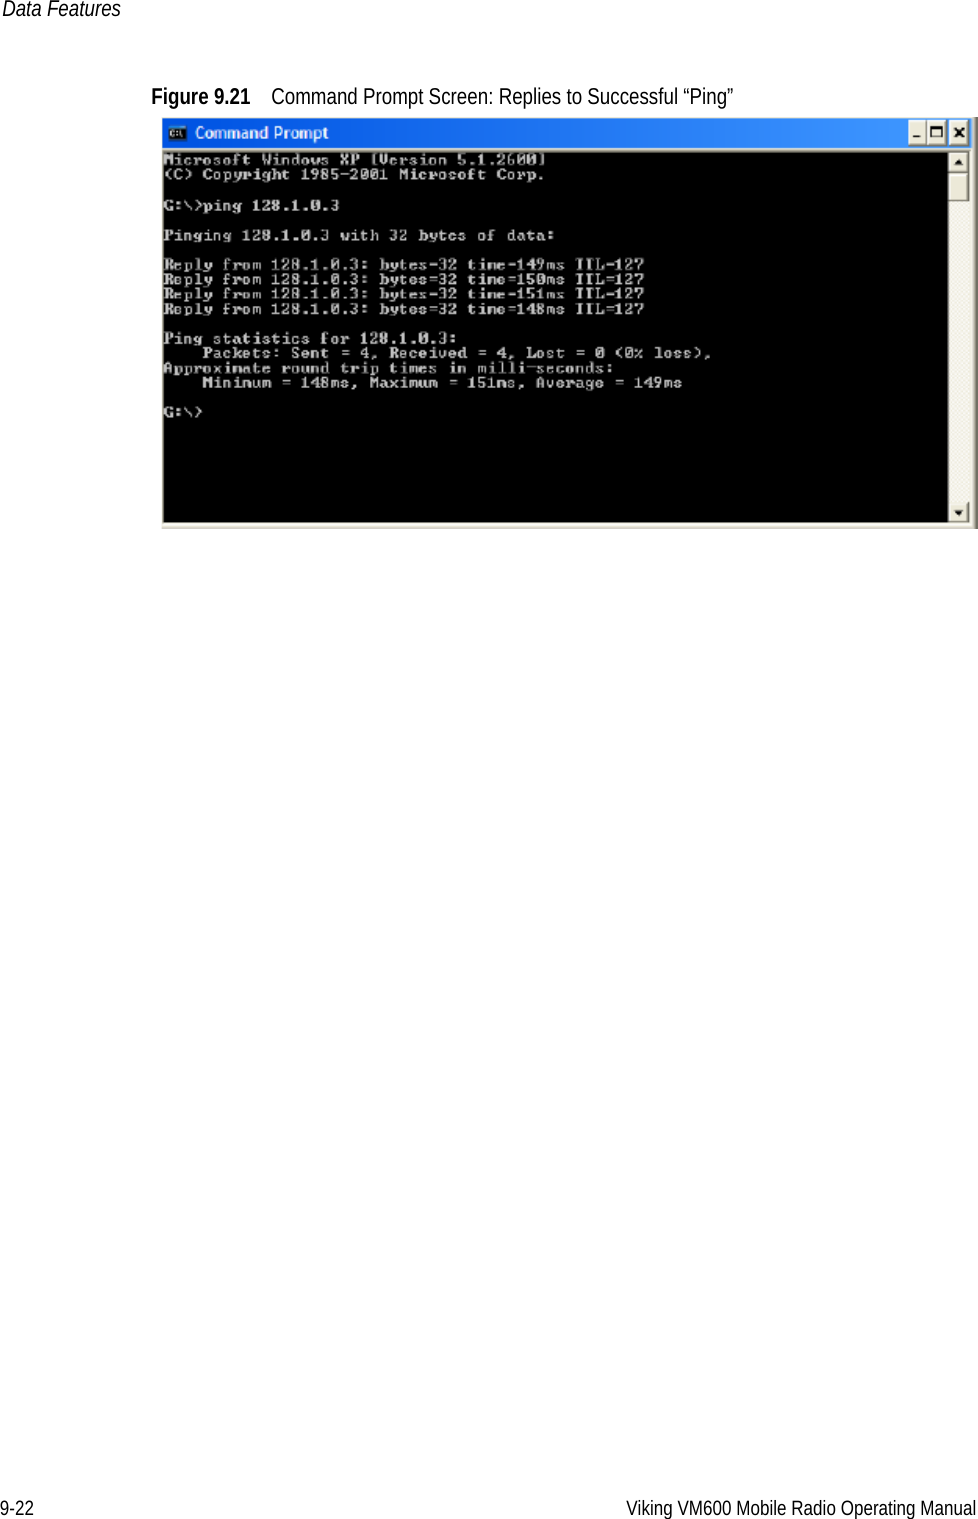 9-22 Viking VM600 Mobile Radio Operating ManualData FeaturesFigure 9.21 Command Prompt Screen: Replies to Successful “Ping”Draft 4/29/2014